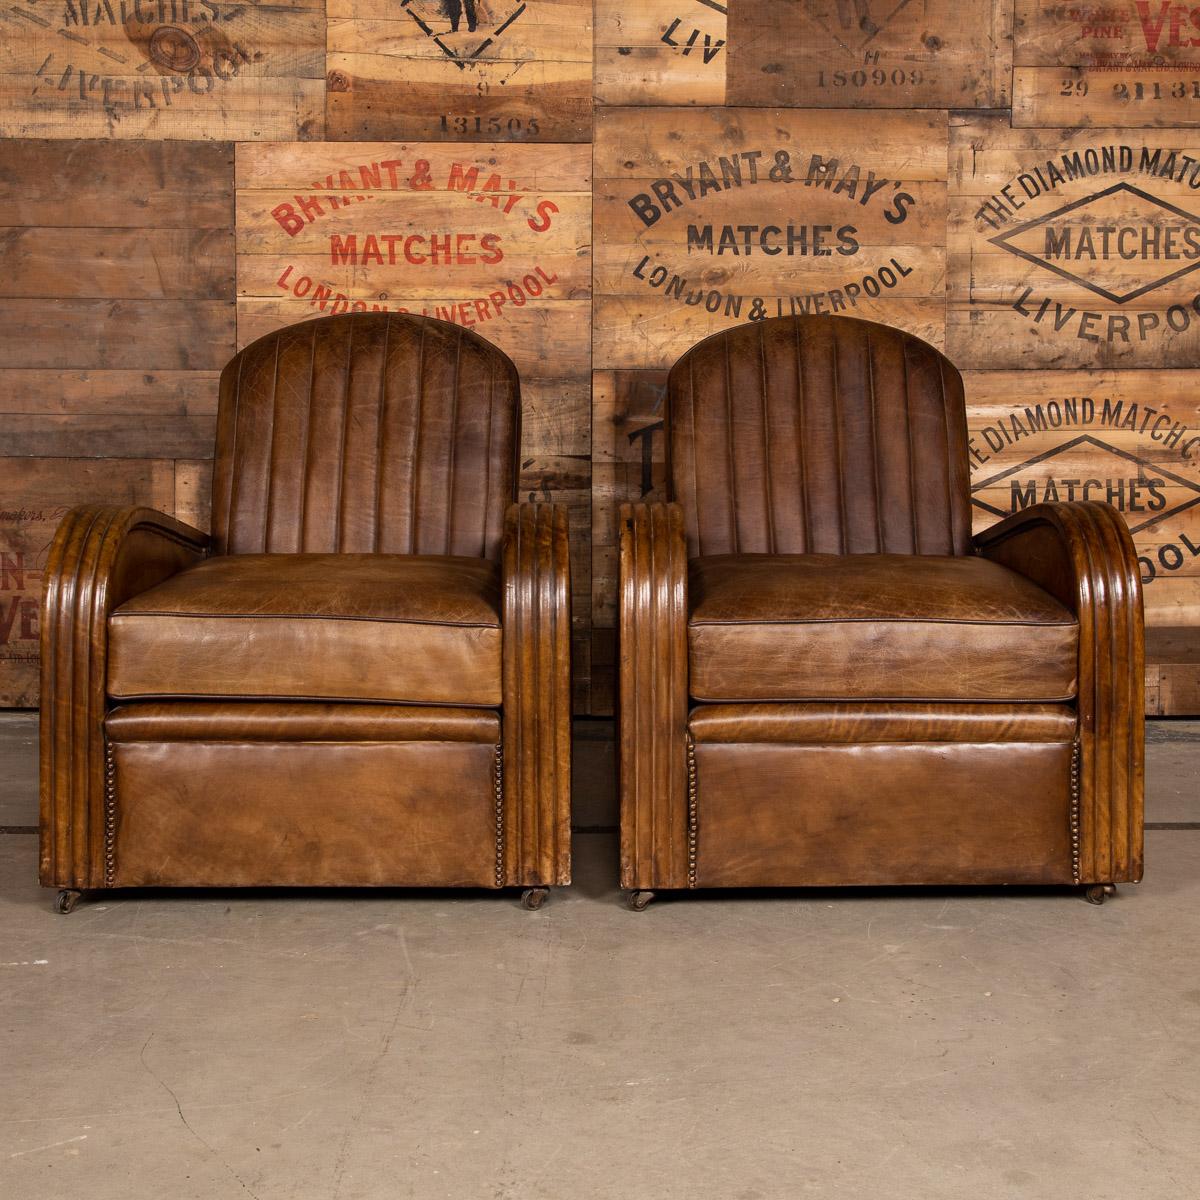 British 20th Century Art Deco Pair of Leather Tub Chairs and Sofa, circa 1920 For Sale